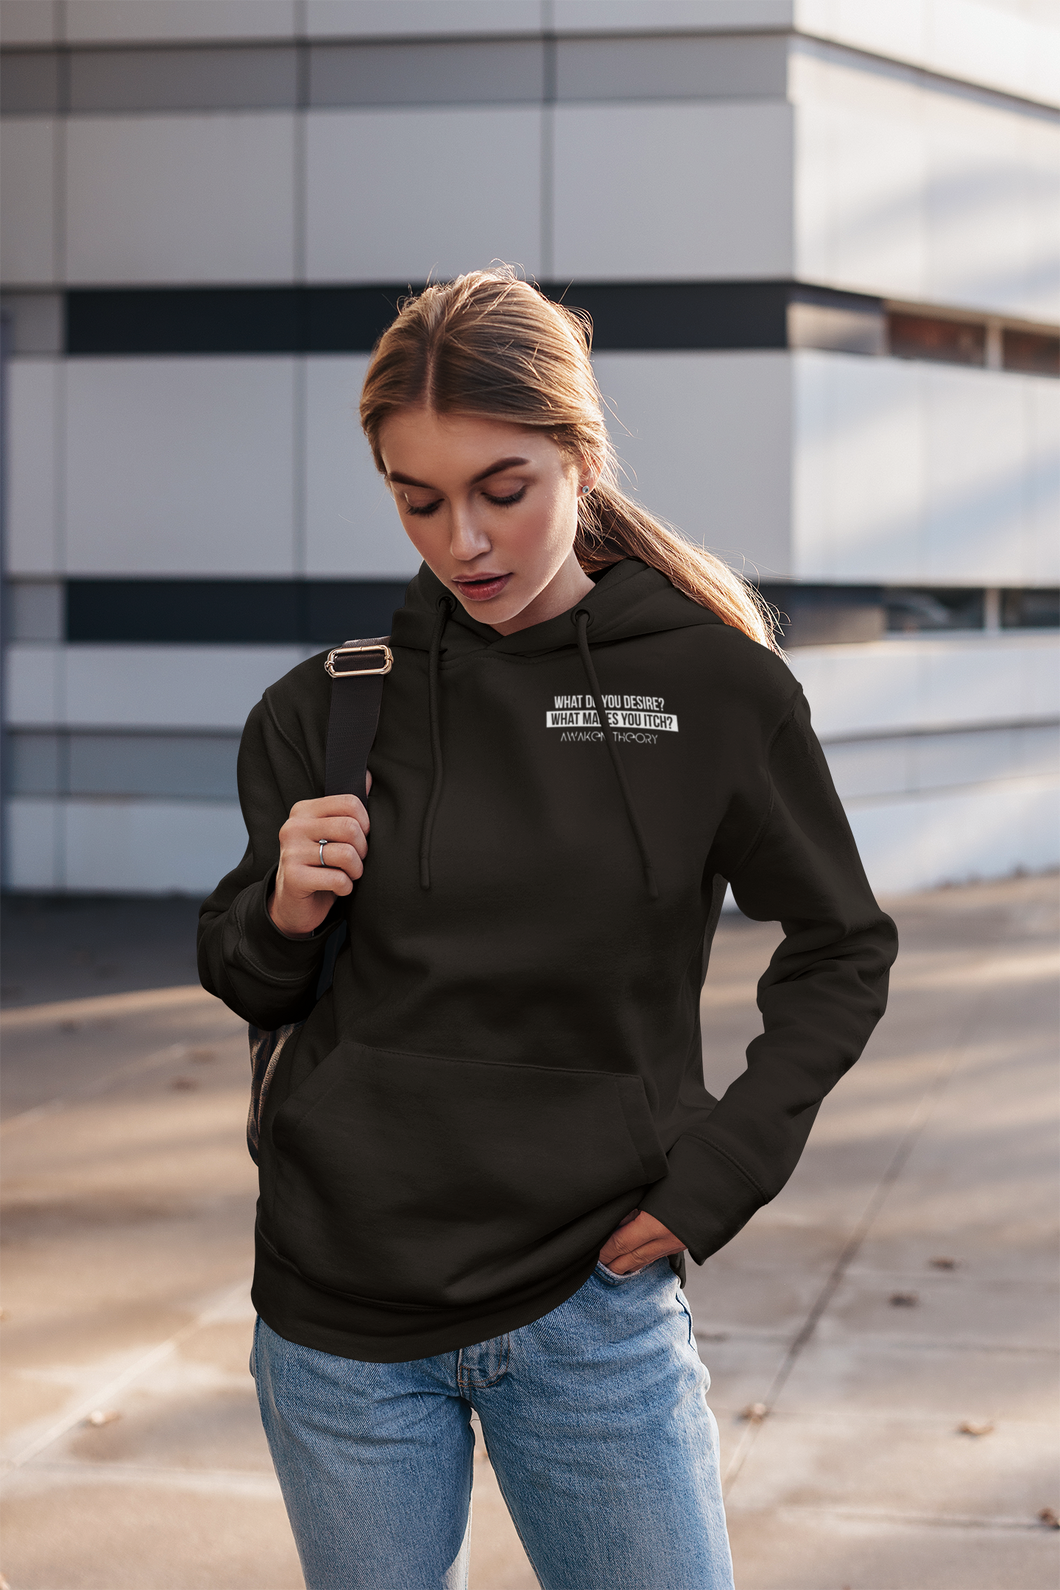 What Do You Desire Ladies Hoodie